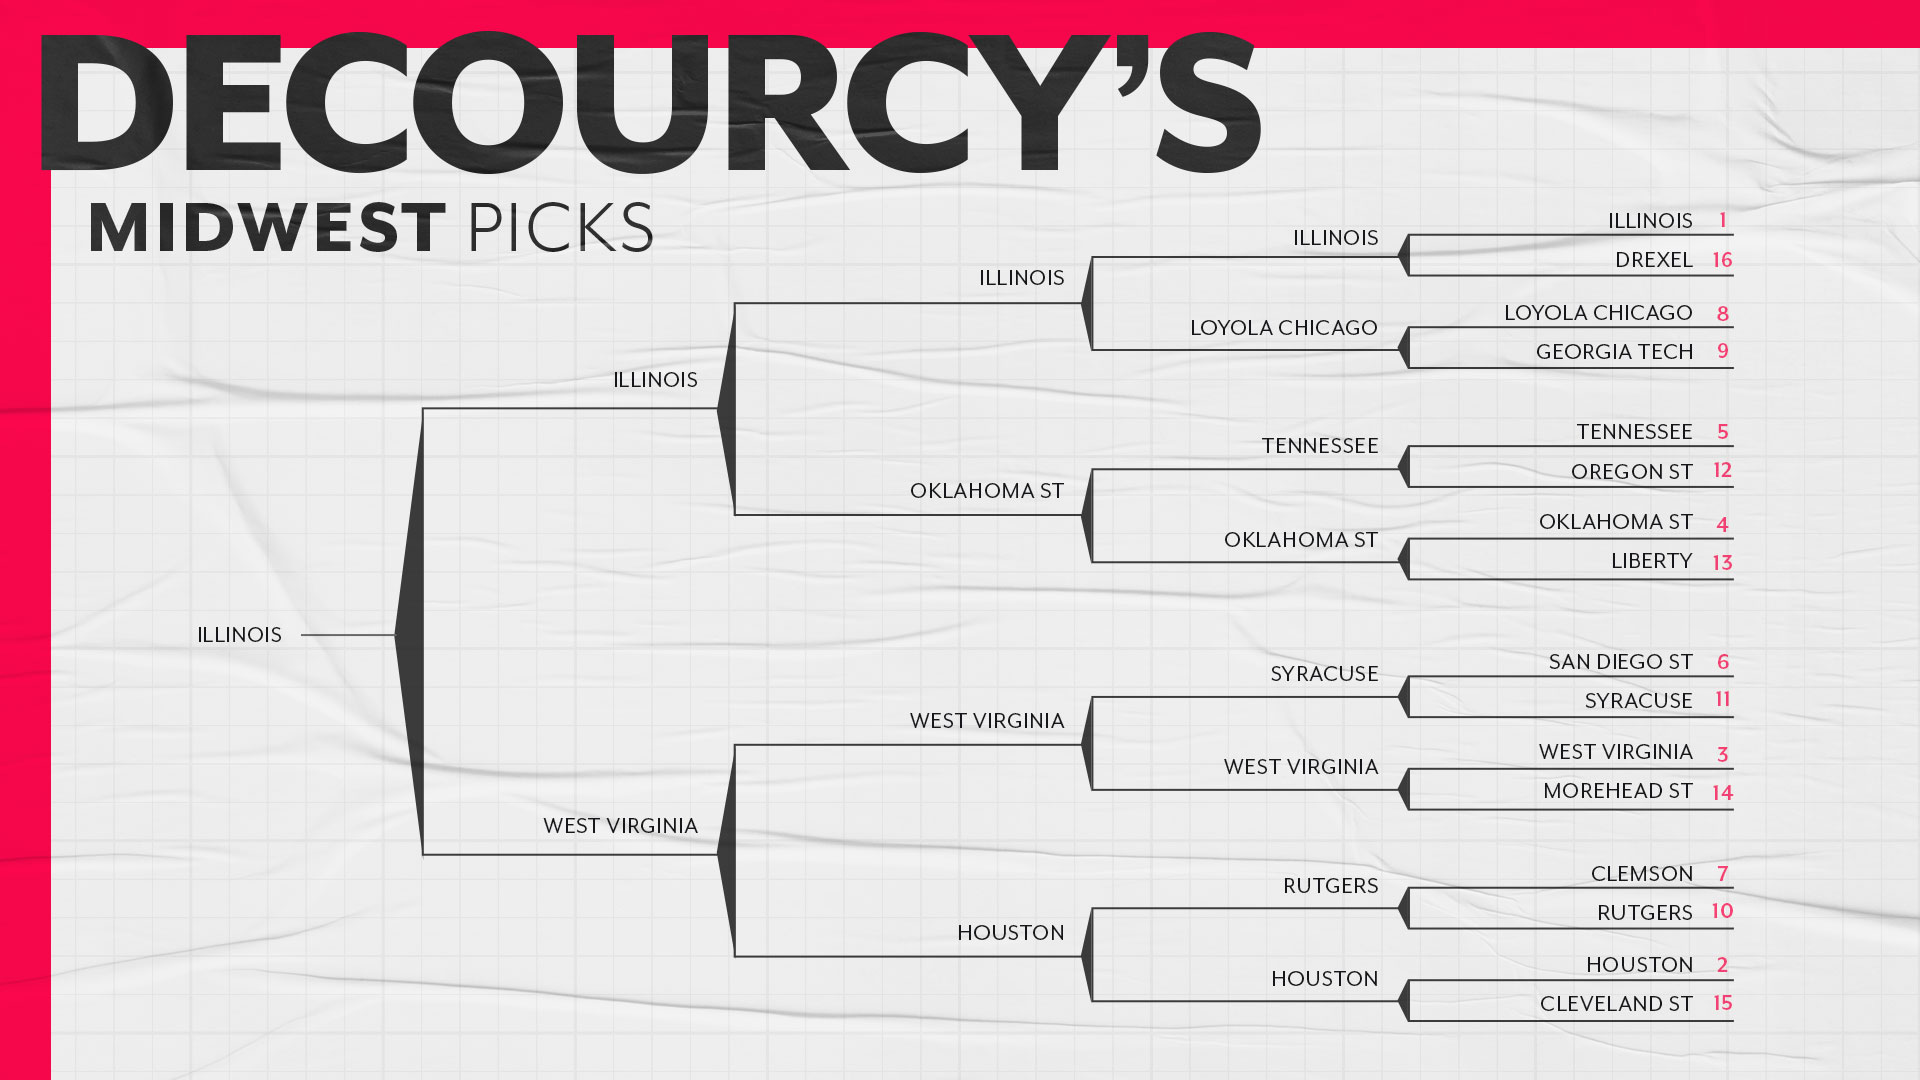 March Madness predictions 2021: Mike DeCourcy's expert NCAA Tournament bracket picks